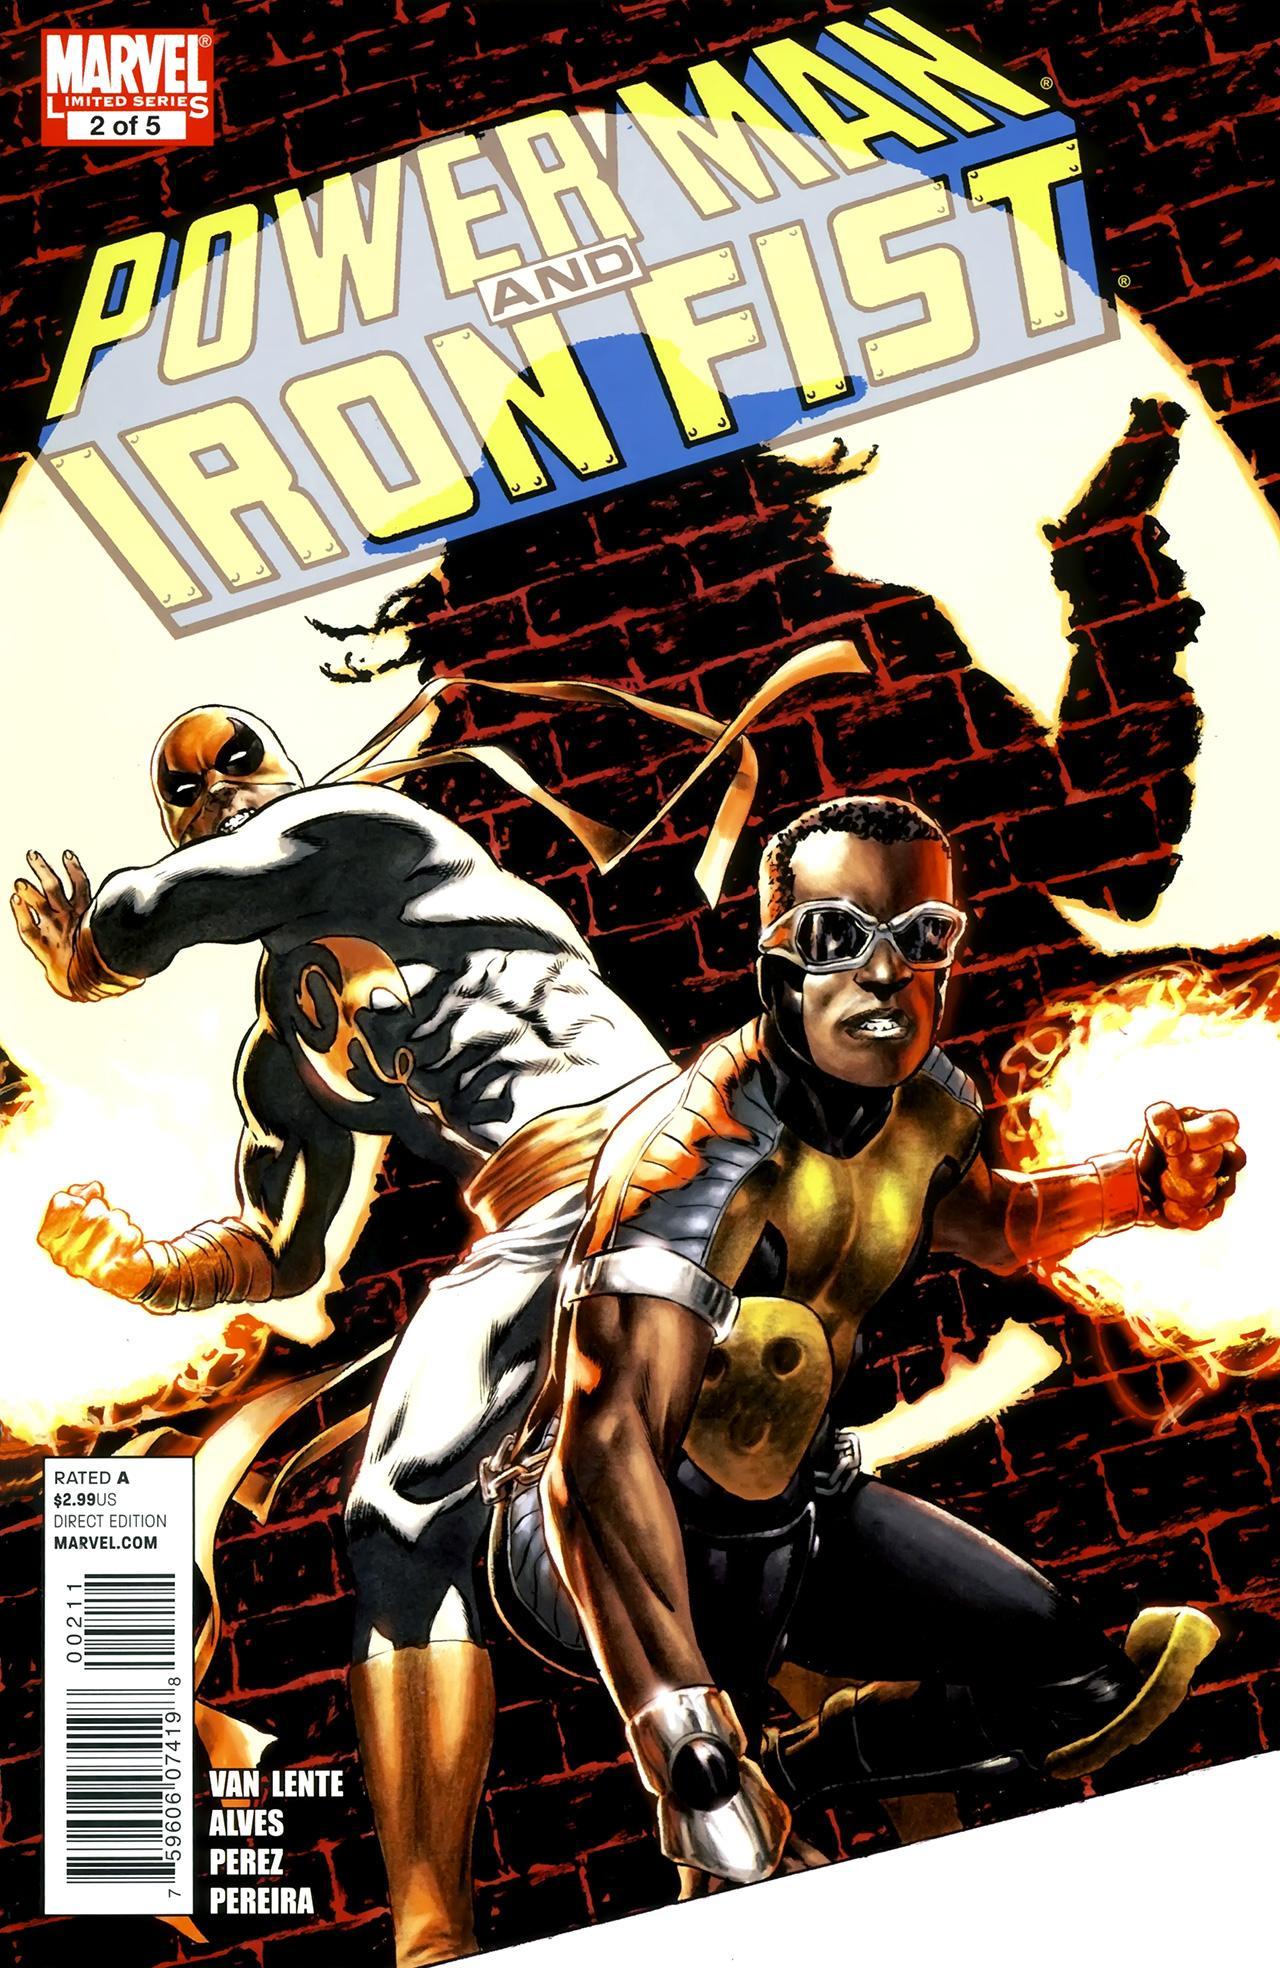 Power Man and Iron Fist Vol. 2 #2